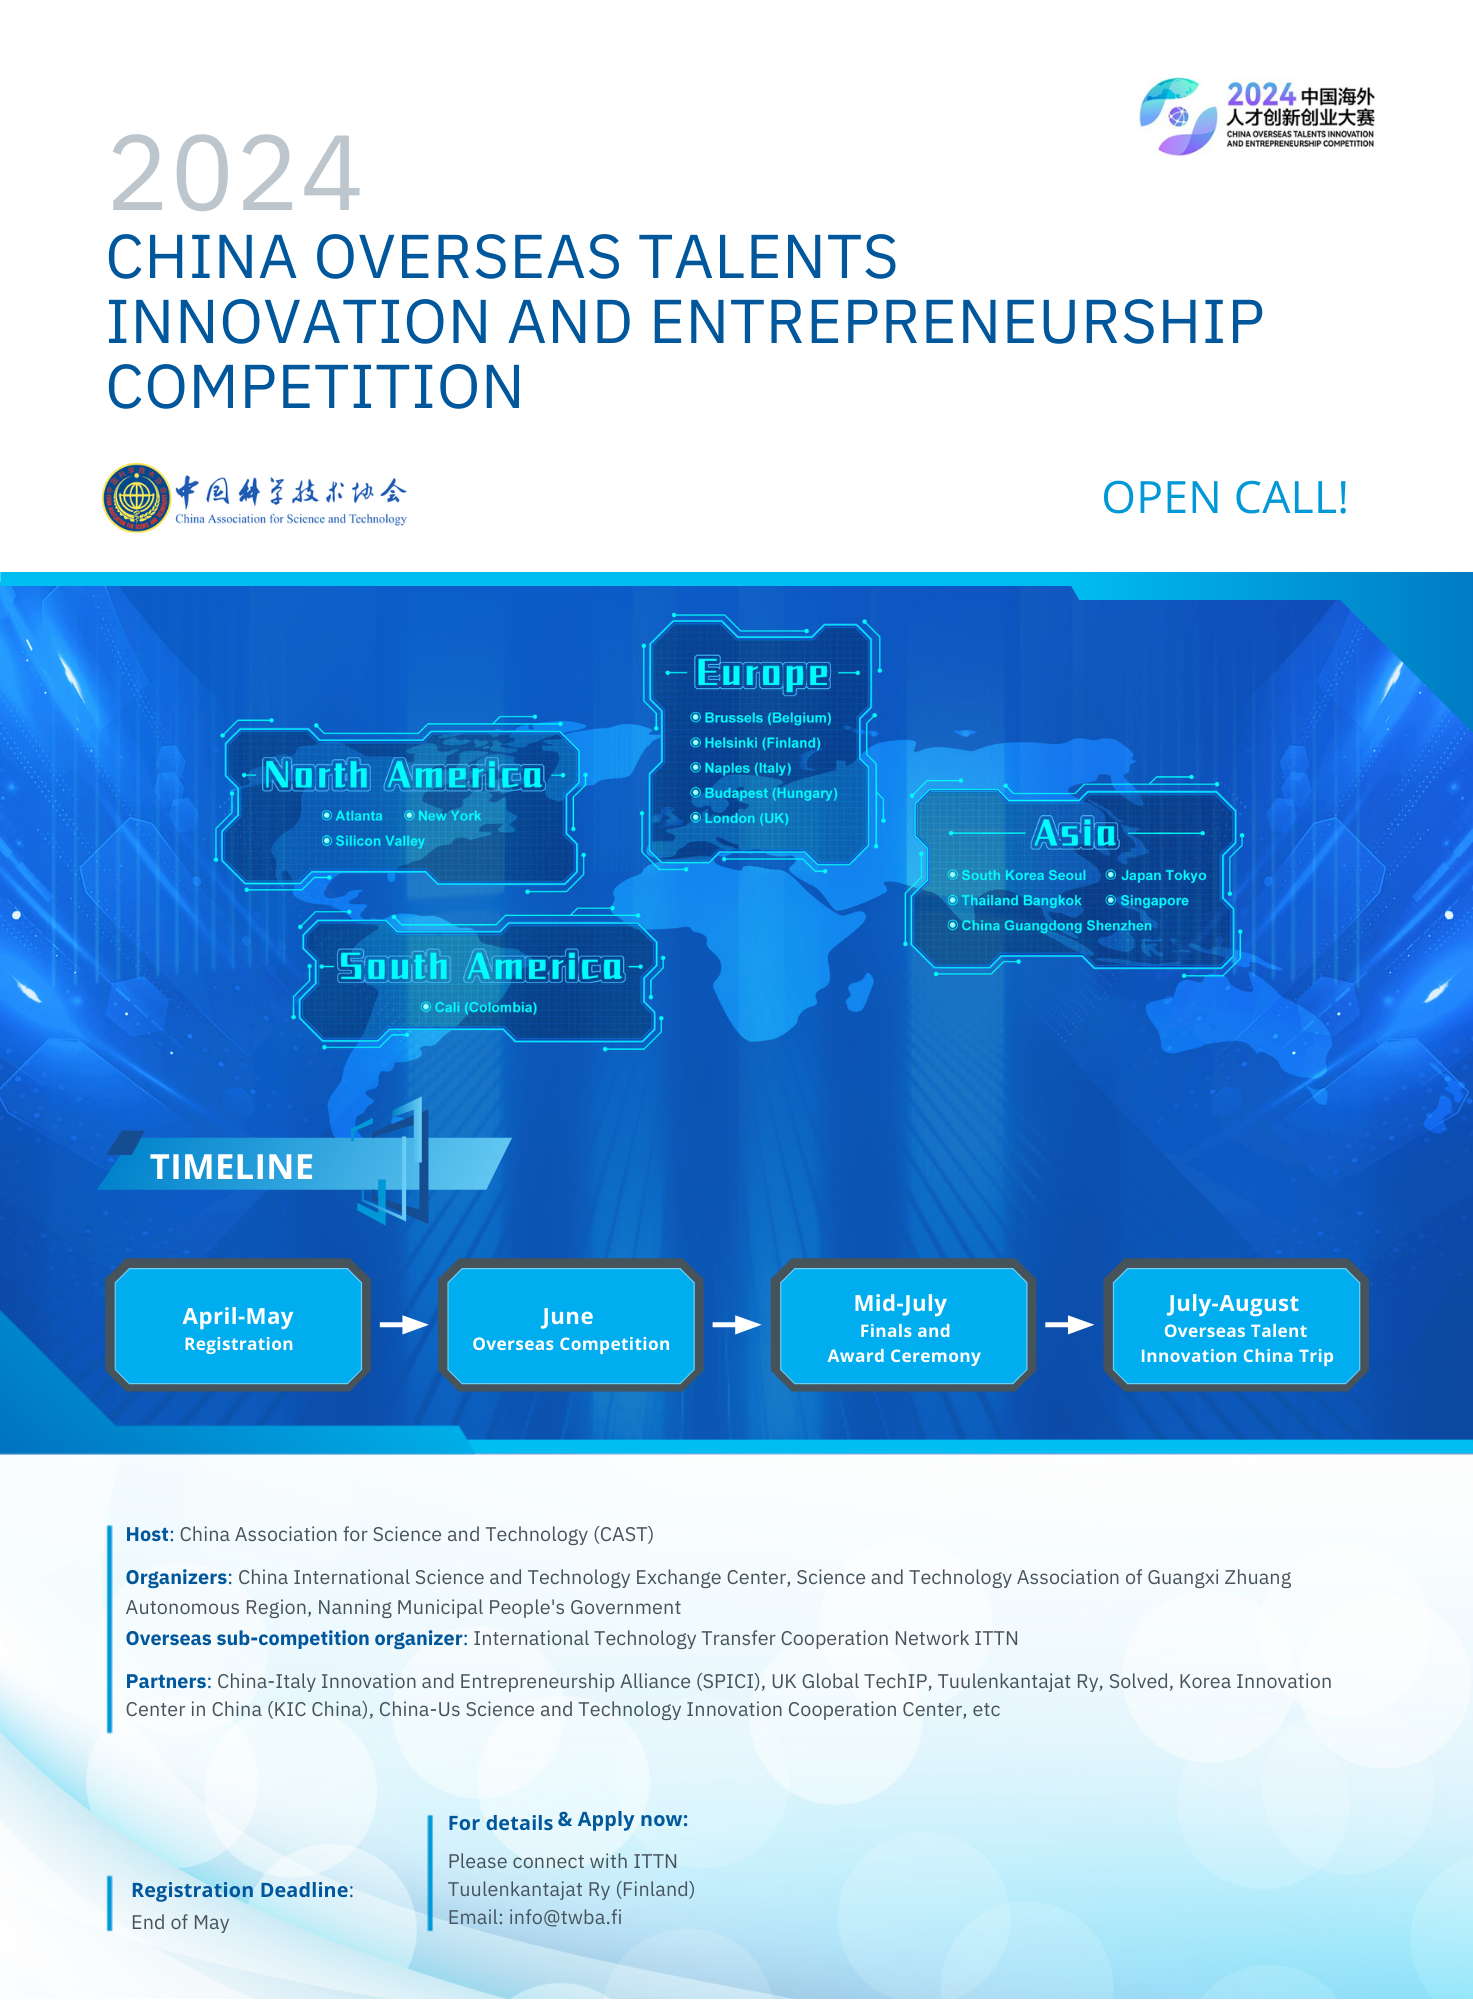 2024 China Overseas Talents Innovation and Entrepreneurship Competition Nordic Europe Division – Finland